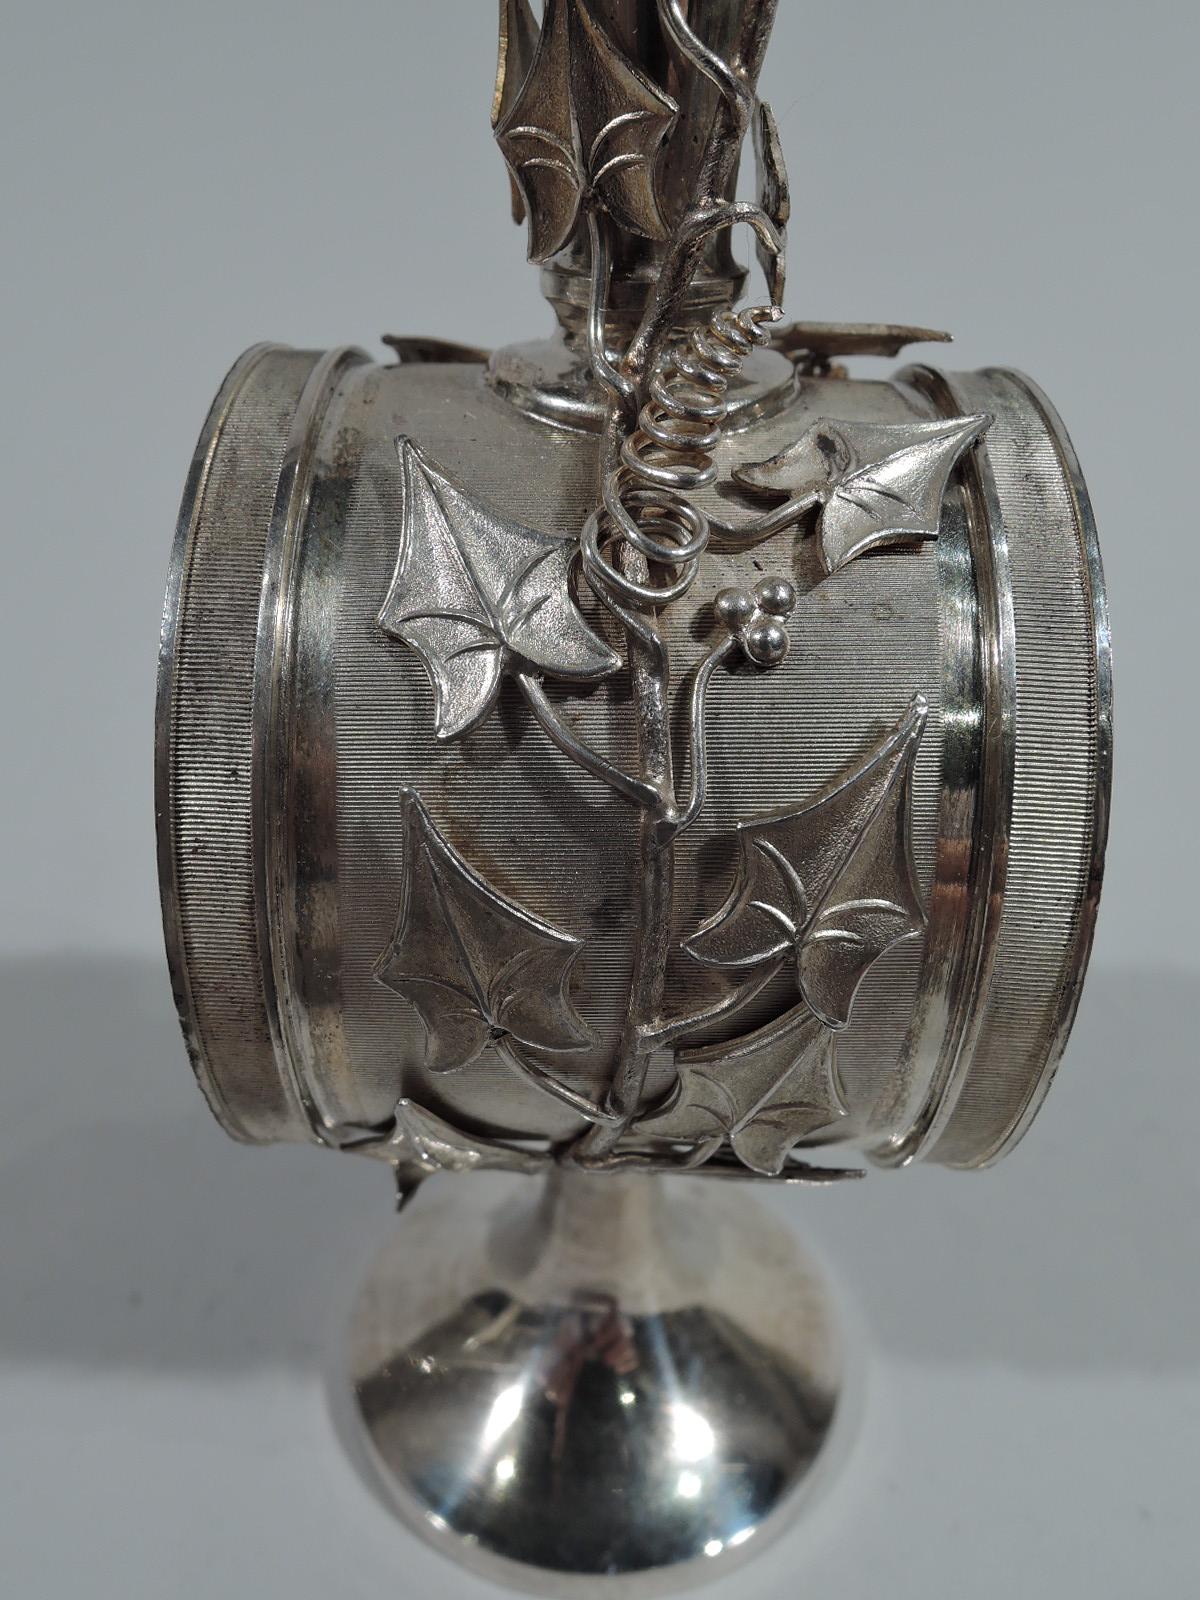 19th Century Antique Whiting Aesthetic Sterling Silver Napkin Ring with Vase